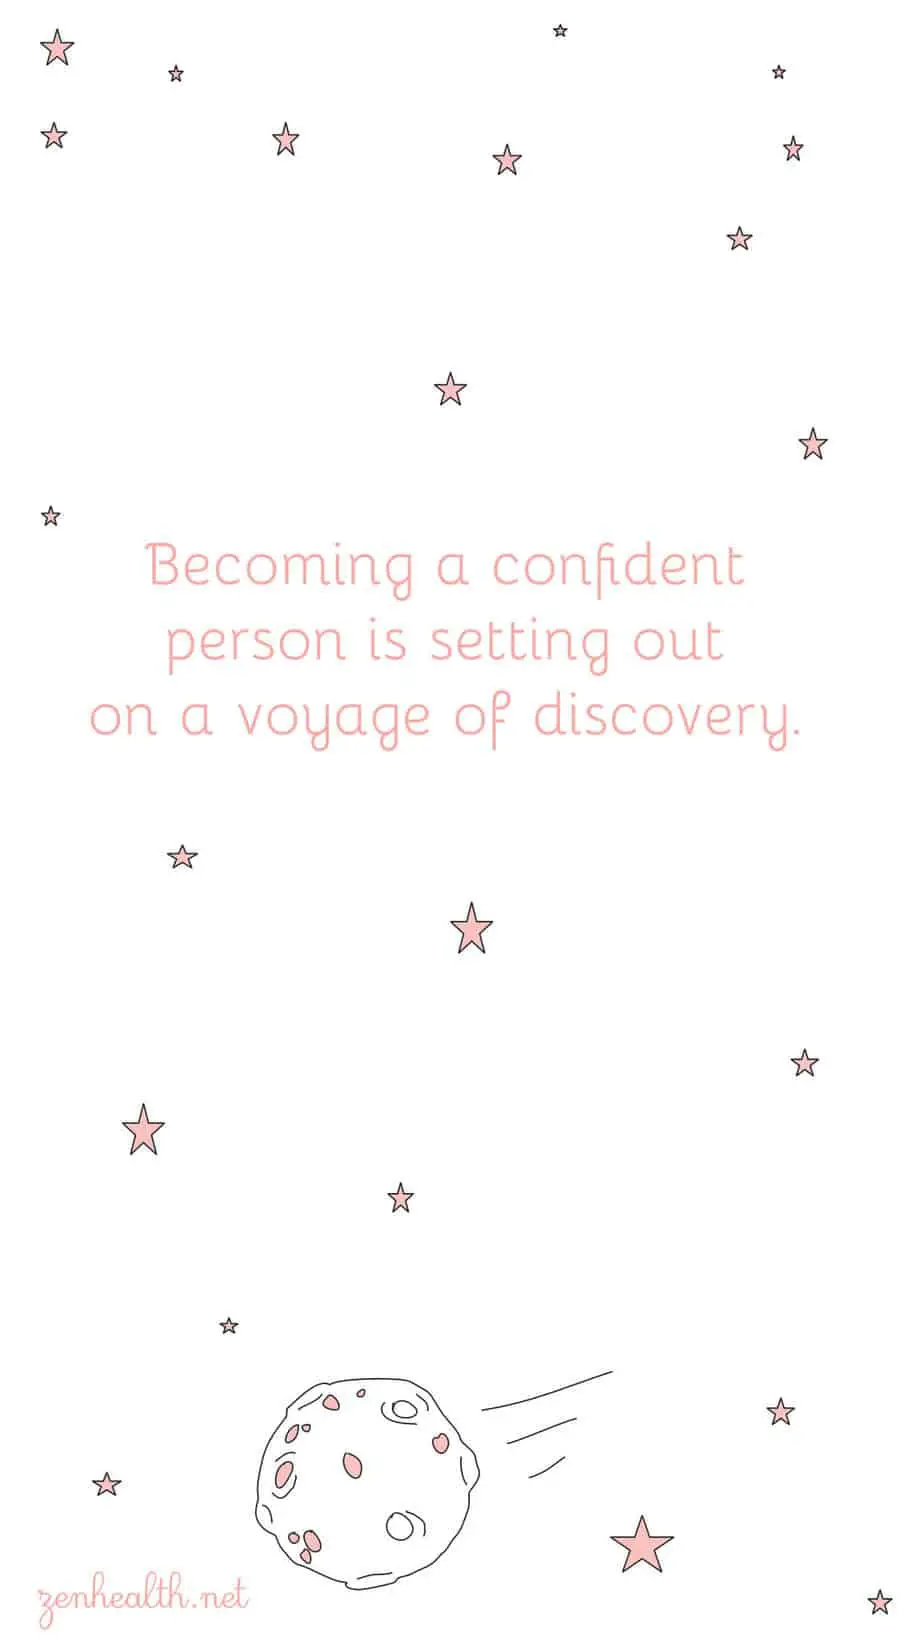 Becoming a confident person is setting out on a voyage of discovery.